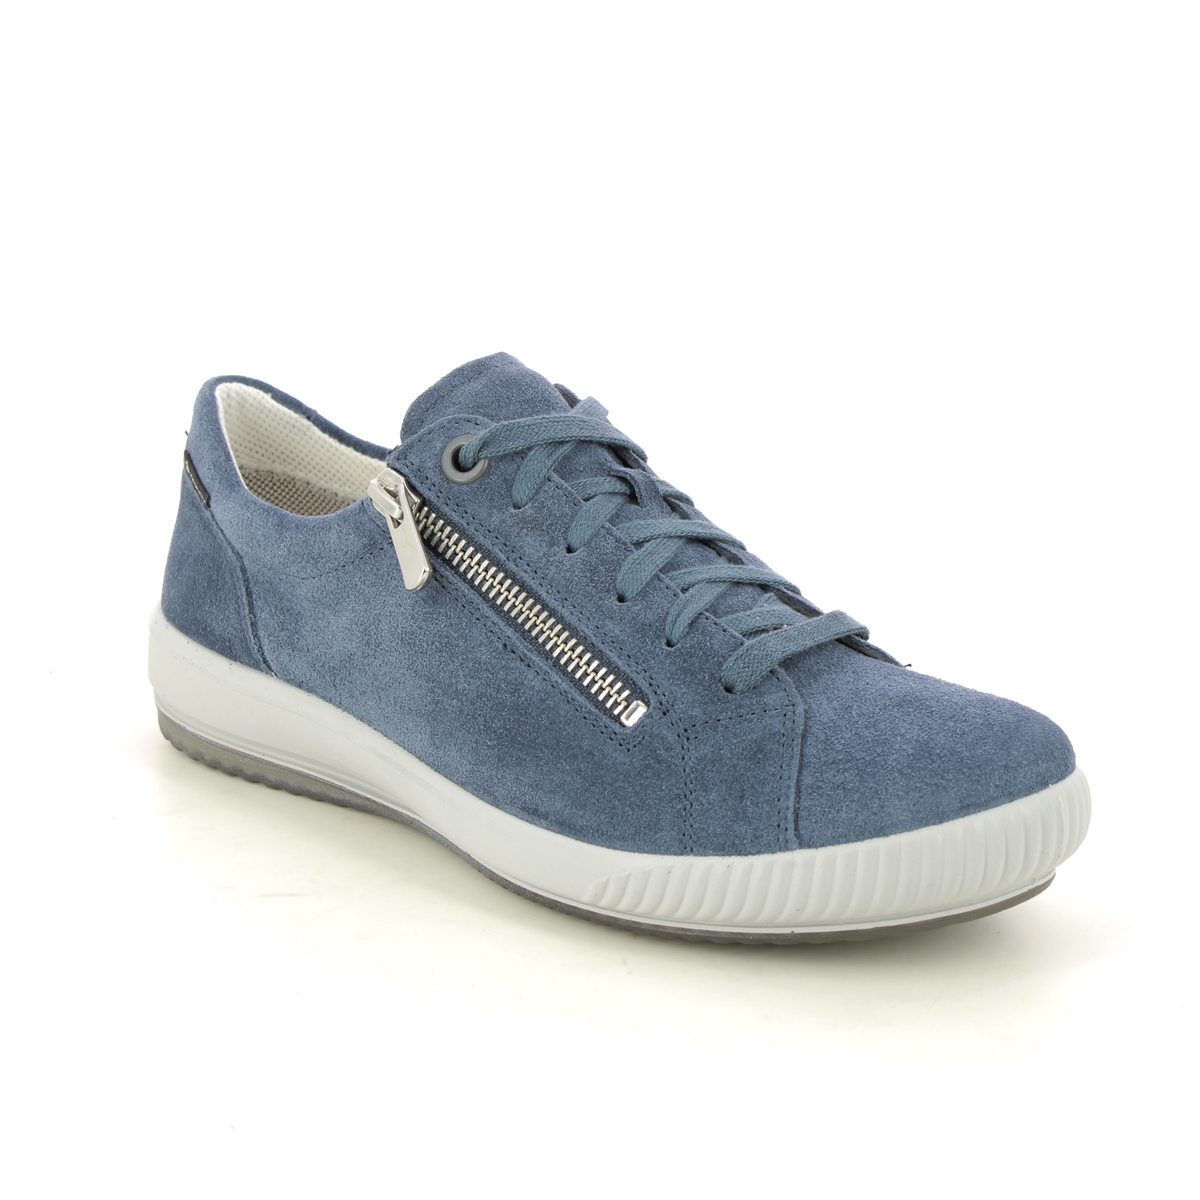 Legero Tanaro 5 Gtx Blue Suede Womens lacing shoes 2000219-8600 in a Plain Leather in Size 6